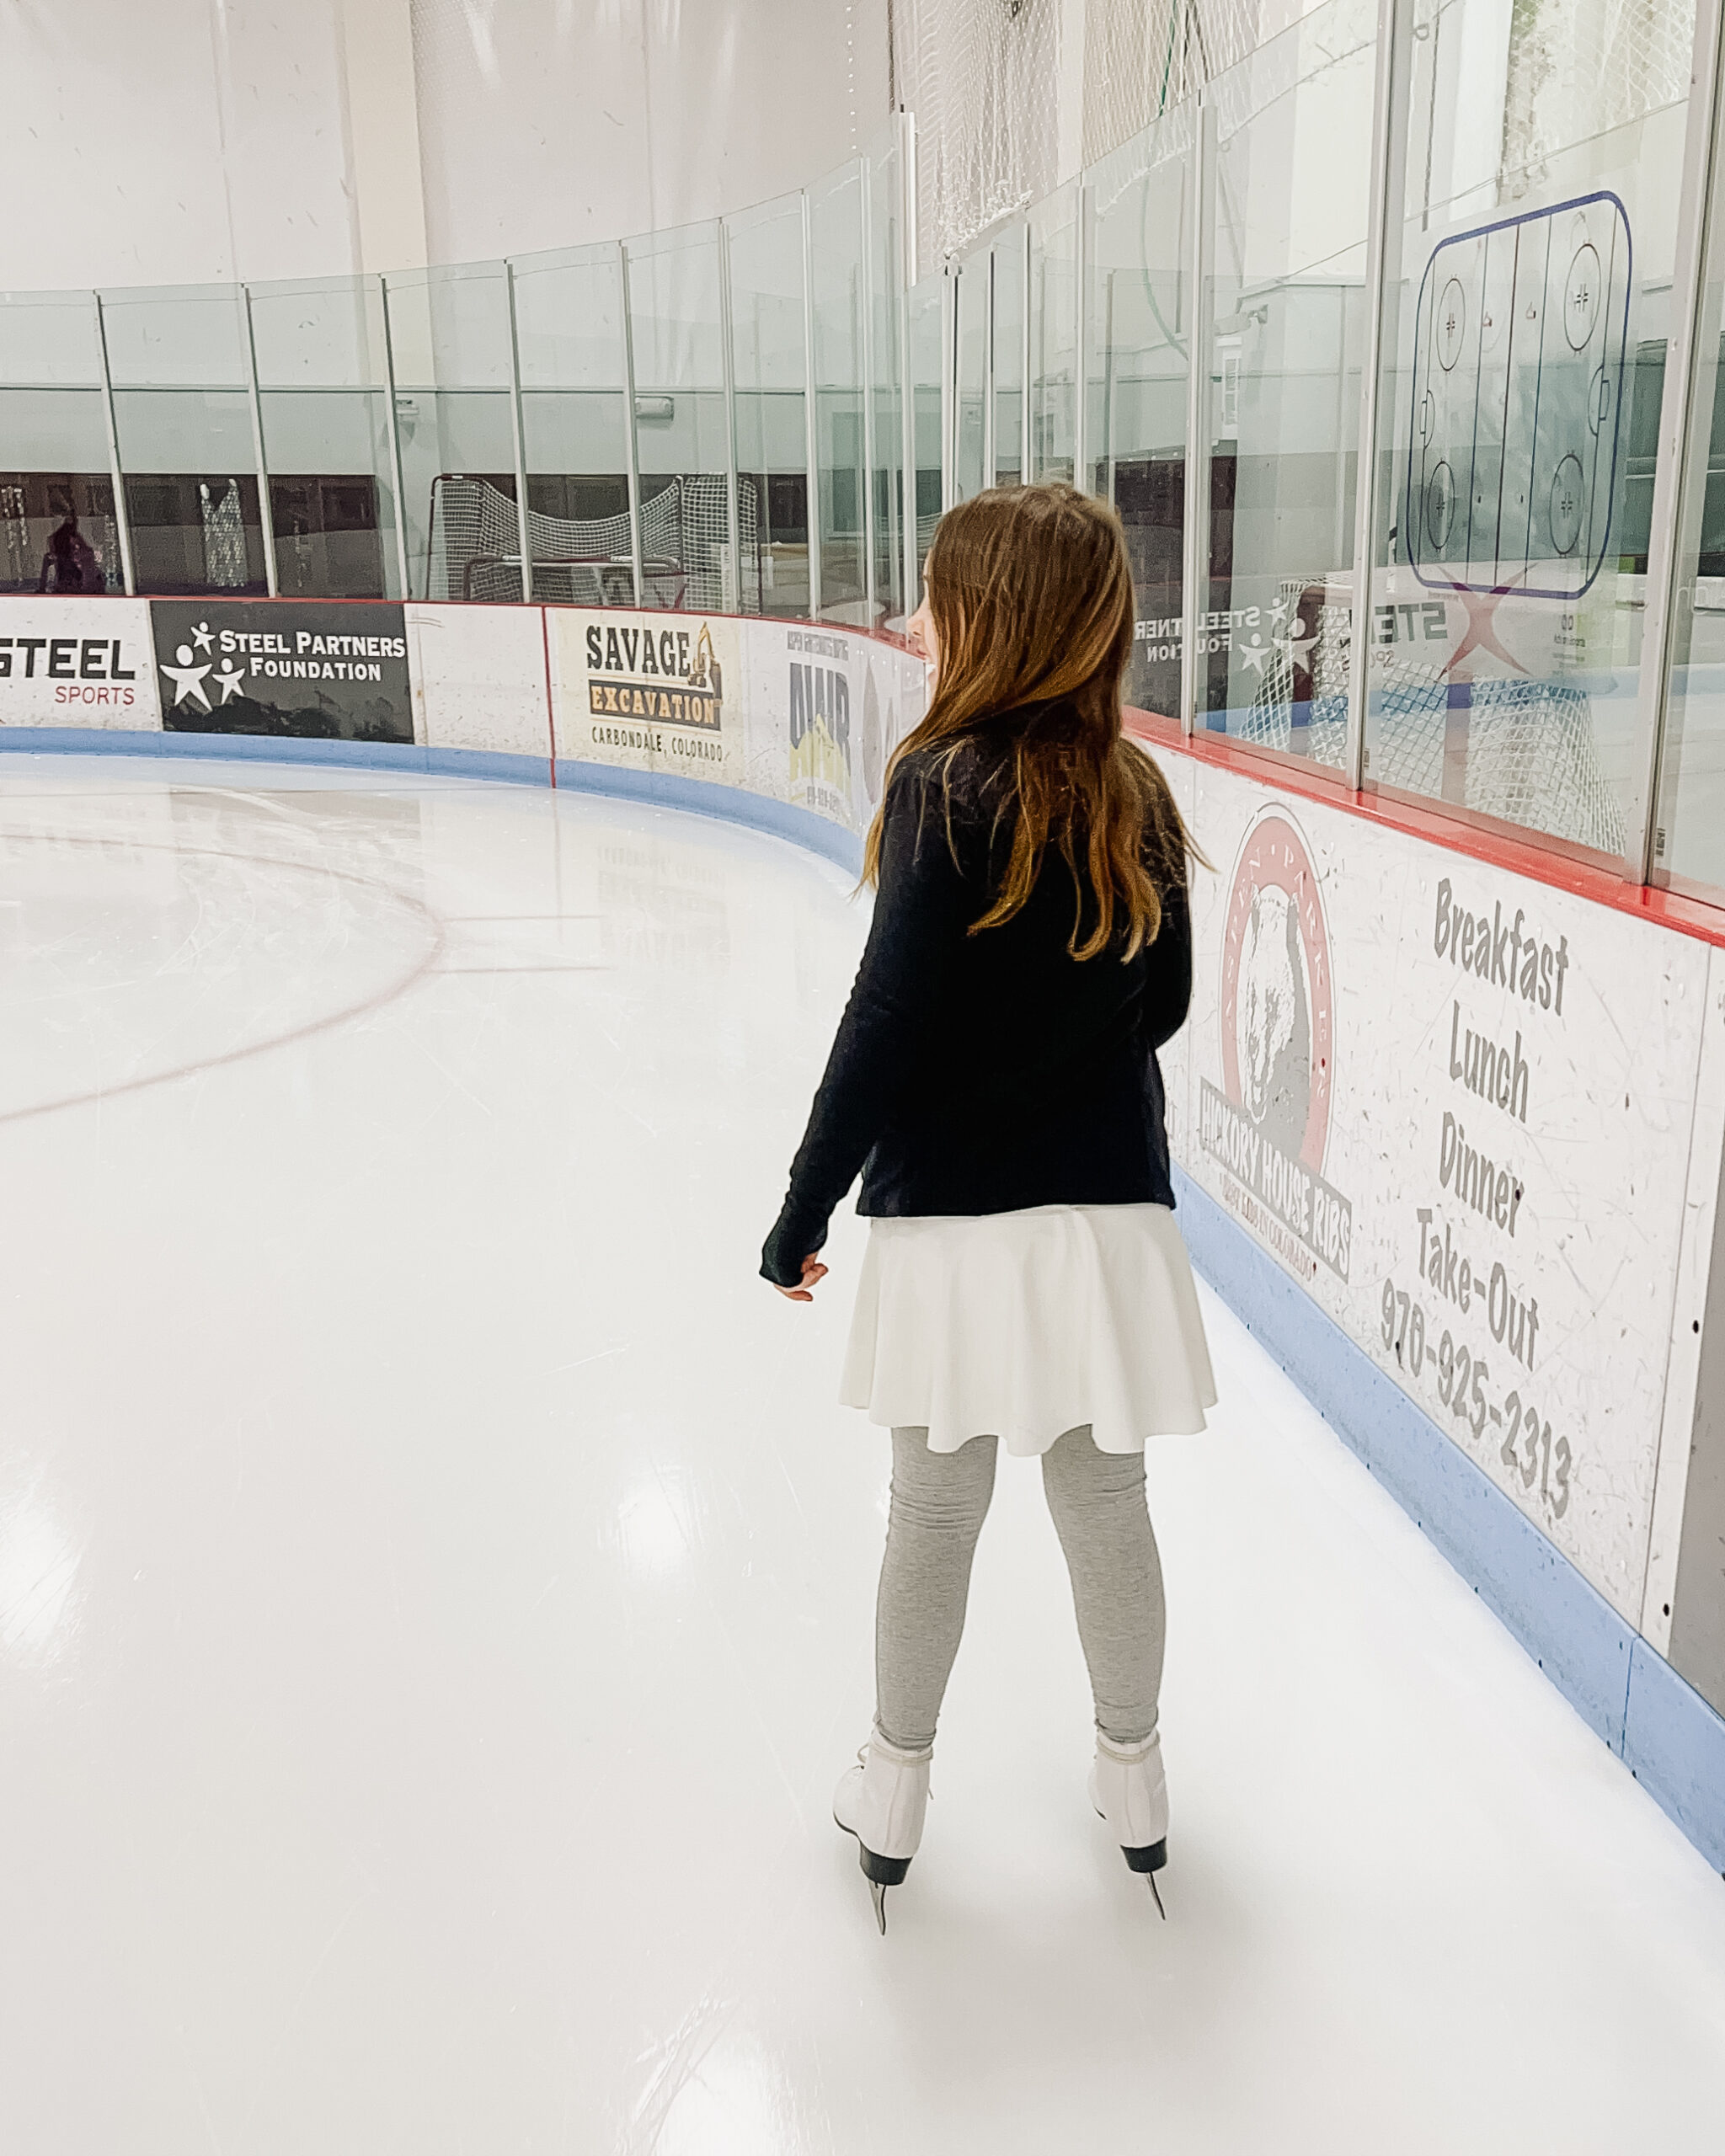 Iceskating at the ARC is a fun way to beat the heat (or bad weather) any time of year. Check the schedule for open skate times. #aspenrecreationcenter #thingstodoinaspen #visitcolorado